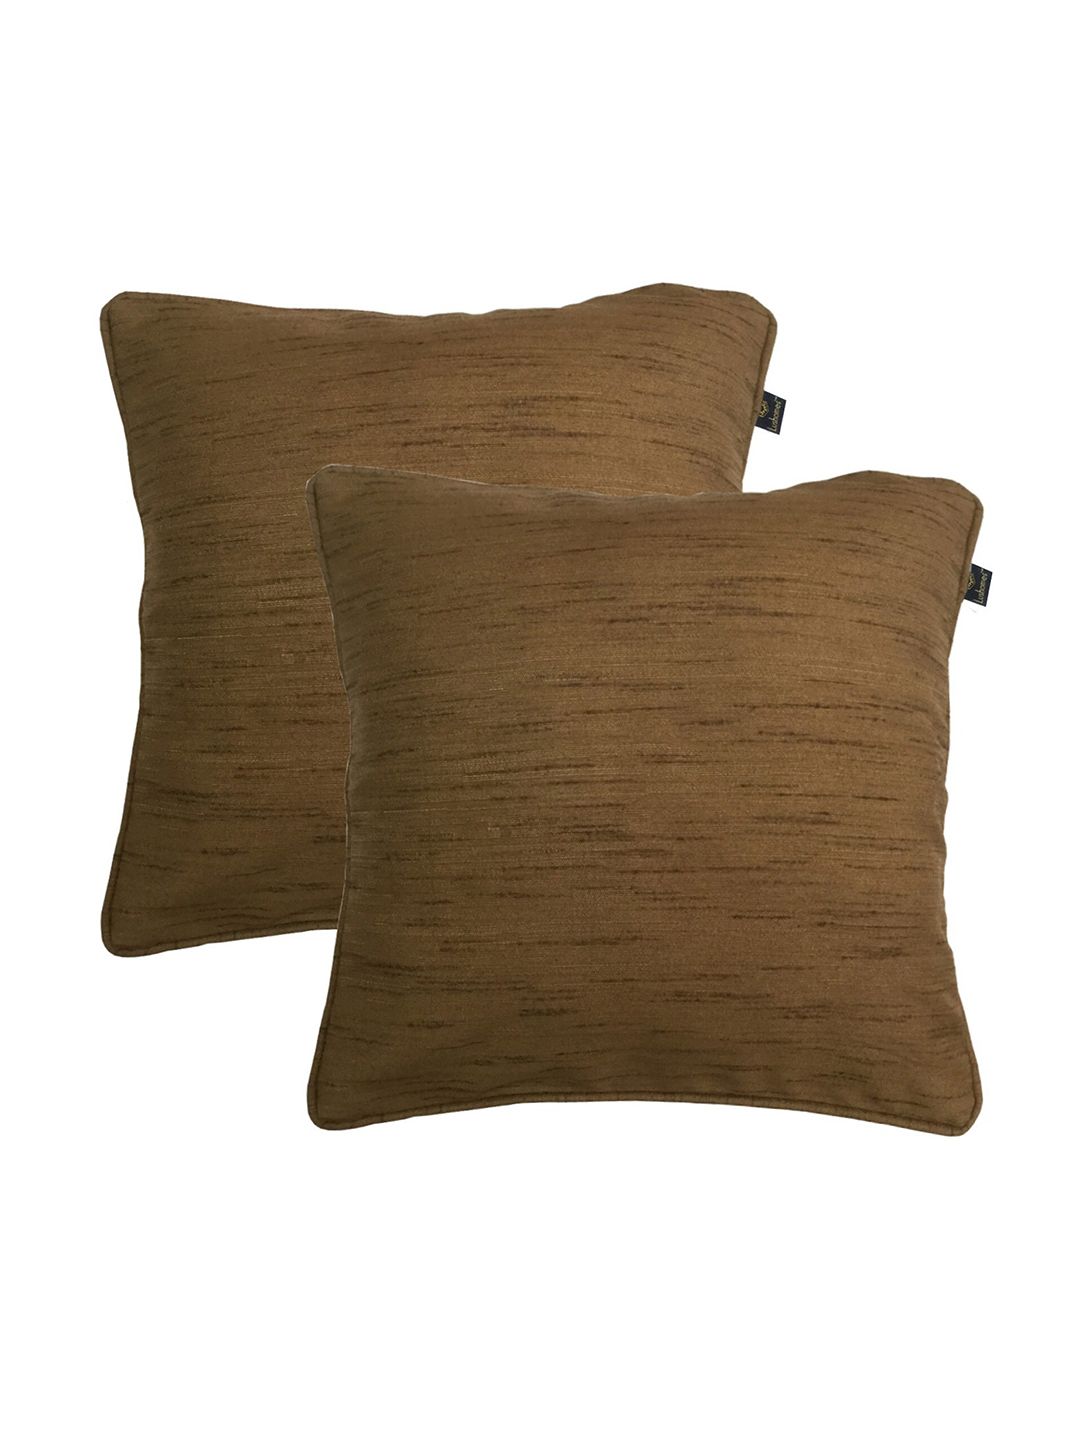 Lushomes Brown Set of 2 Abstract Square Cushion Covers Price in India